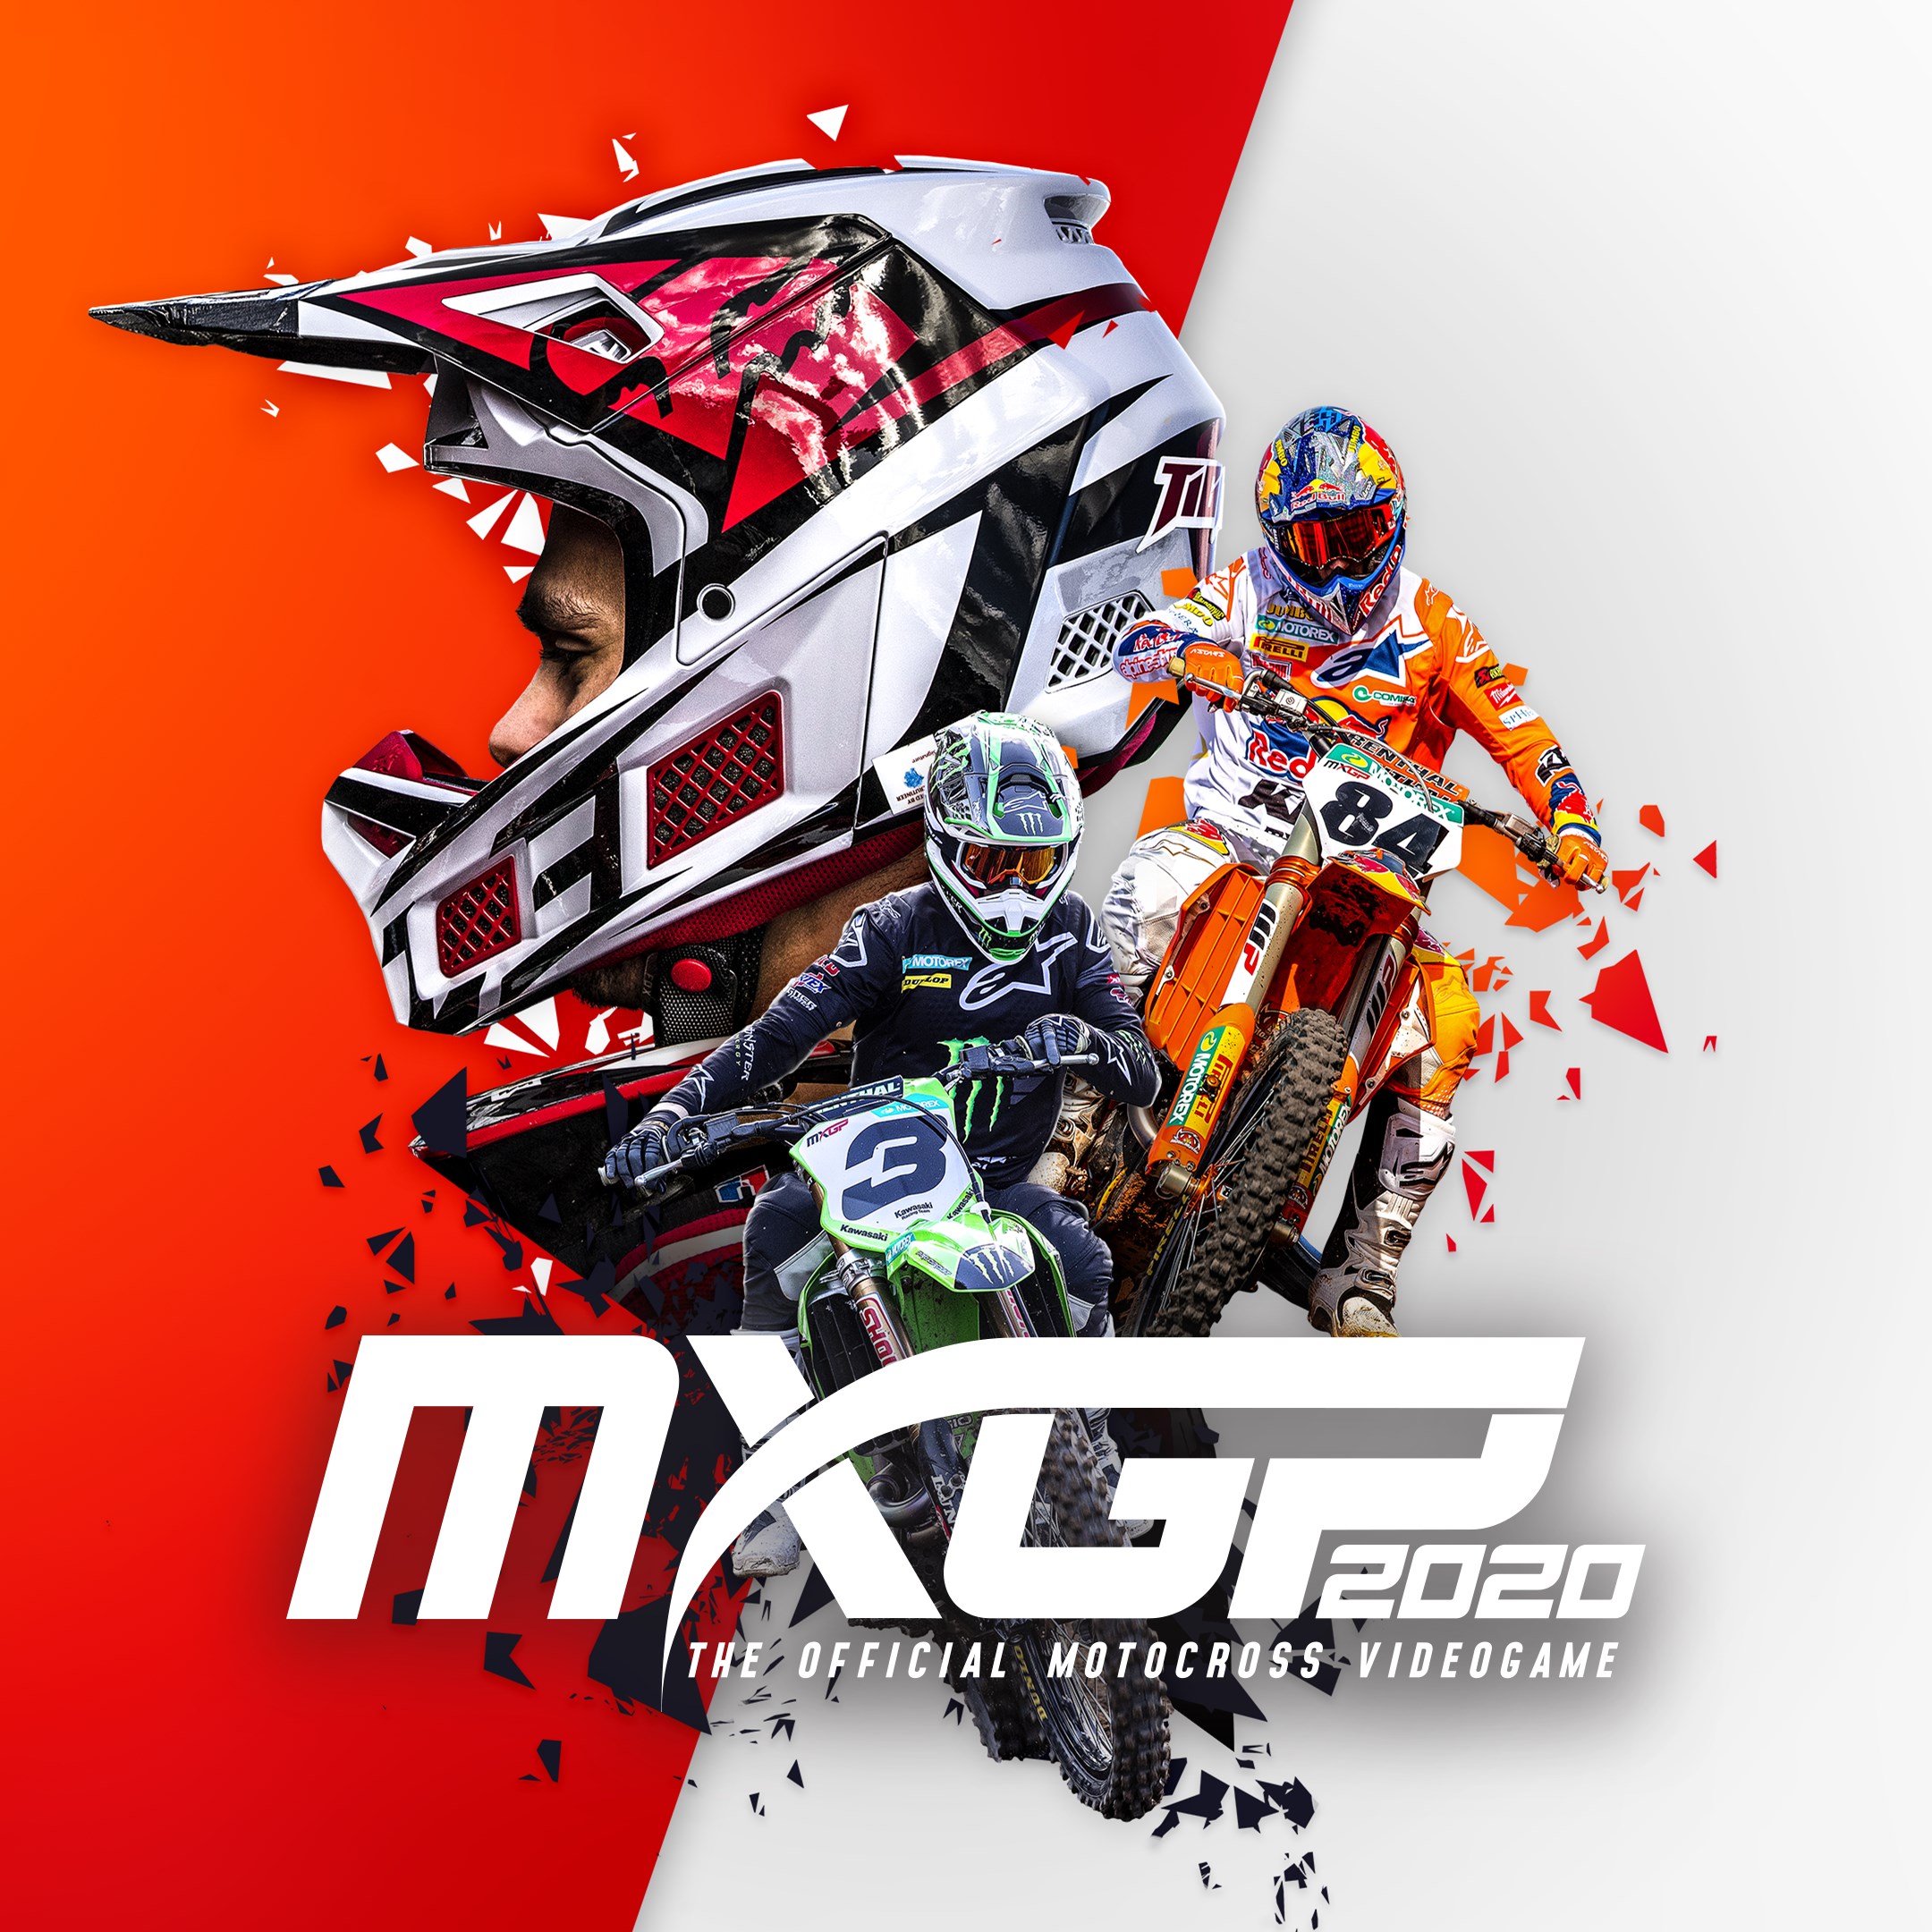 Mxgp the official motocross videogame steam фото 89